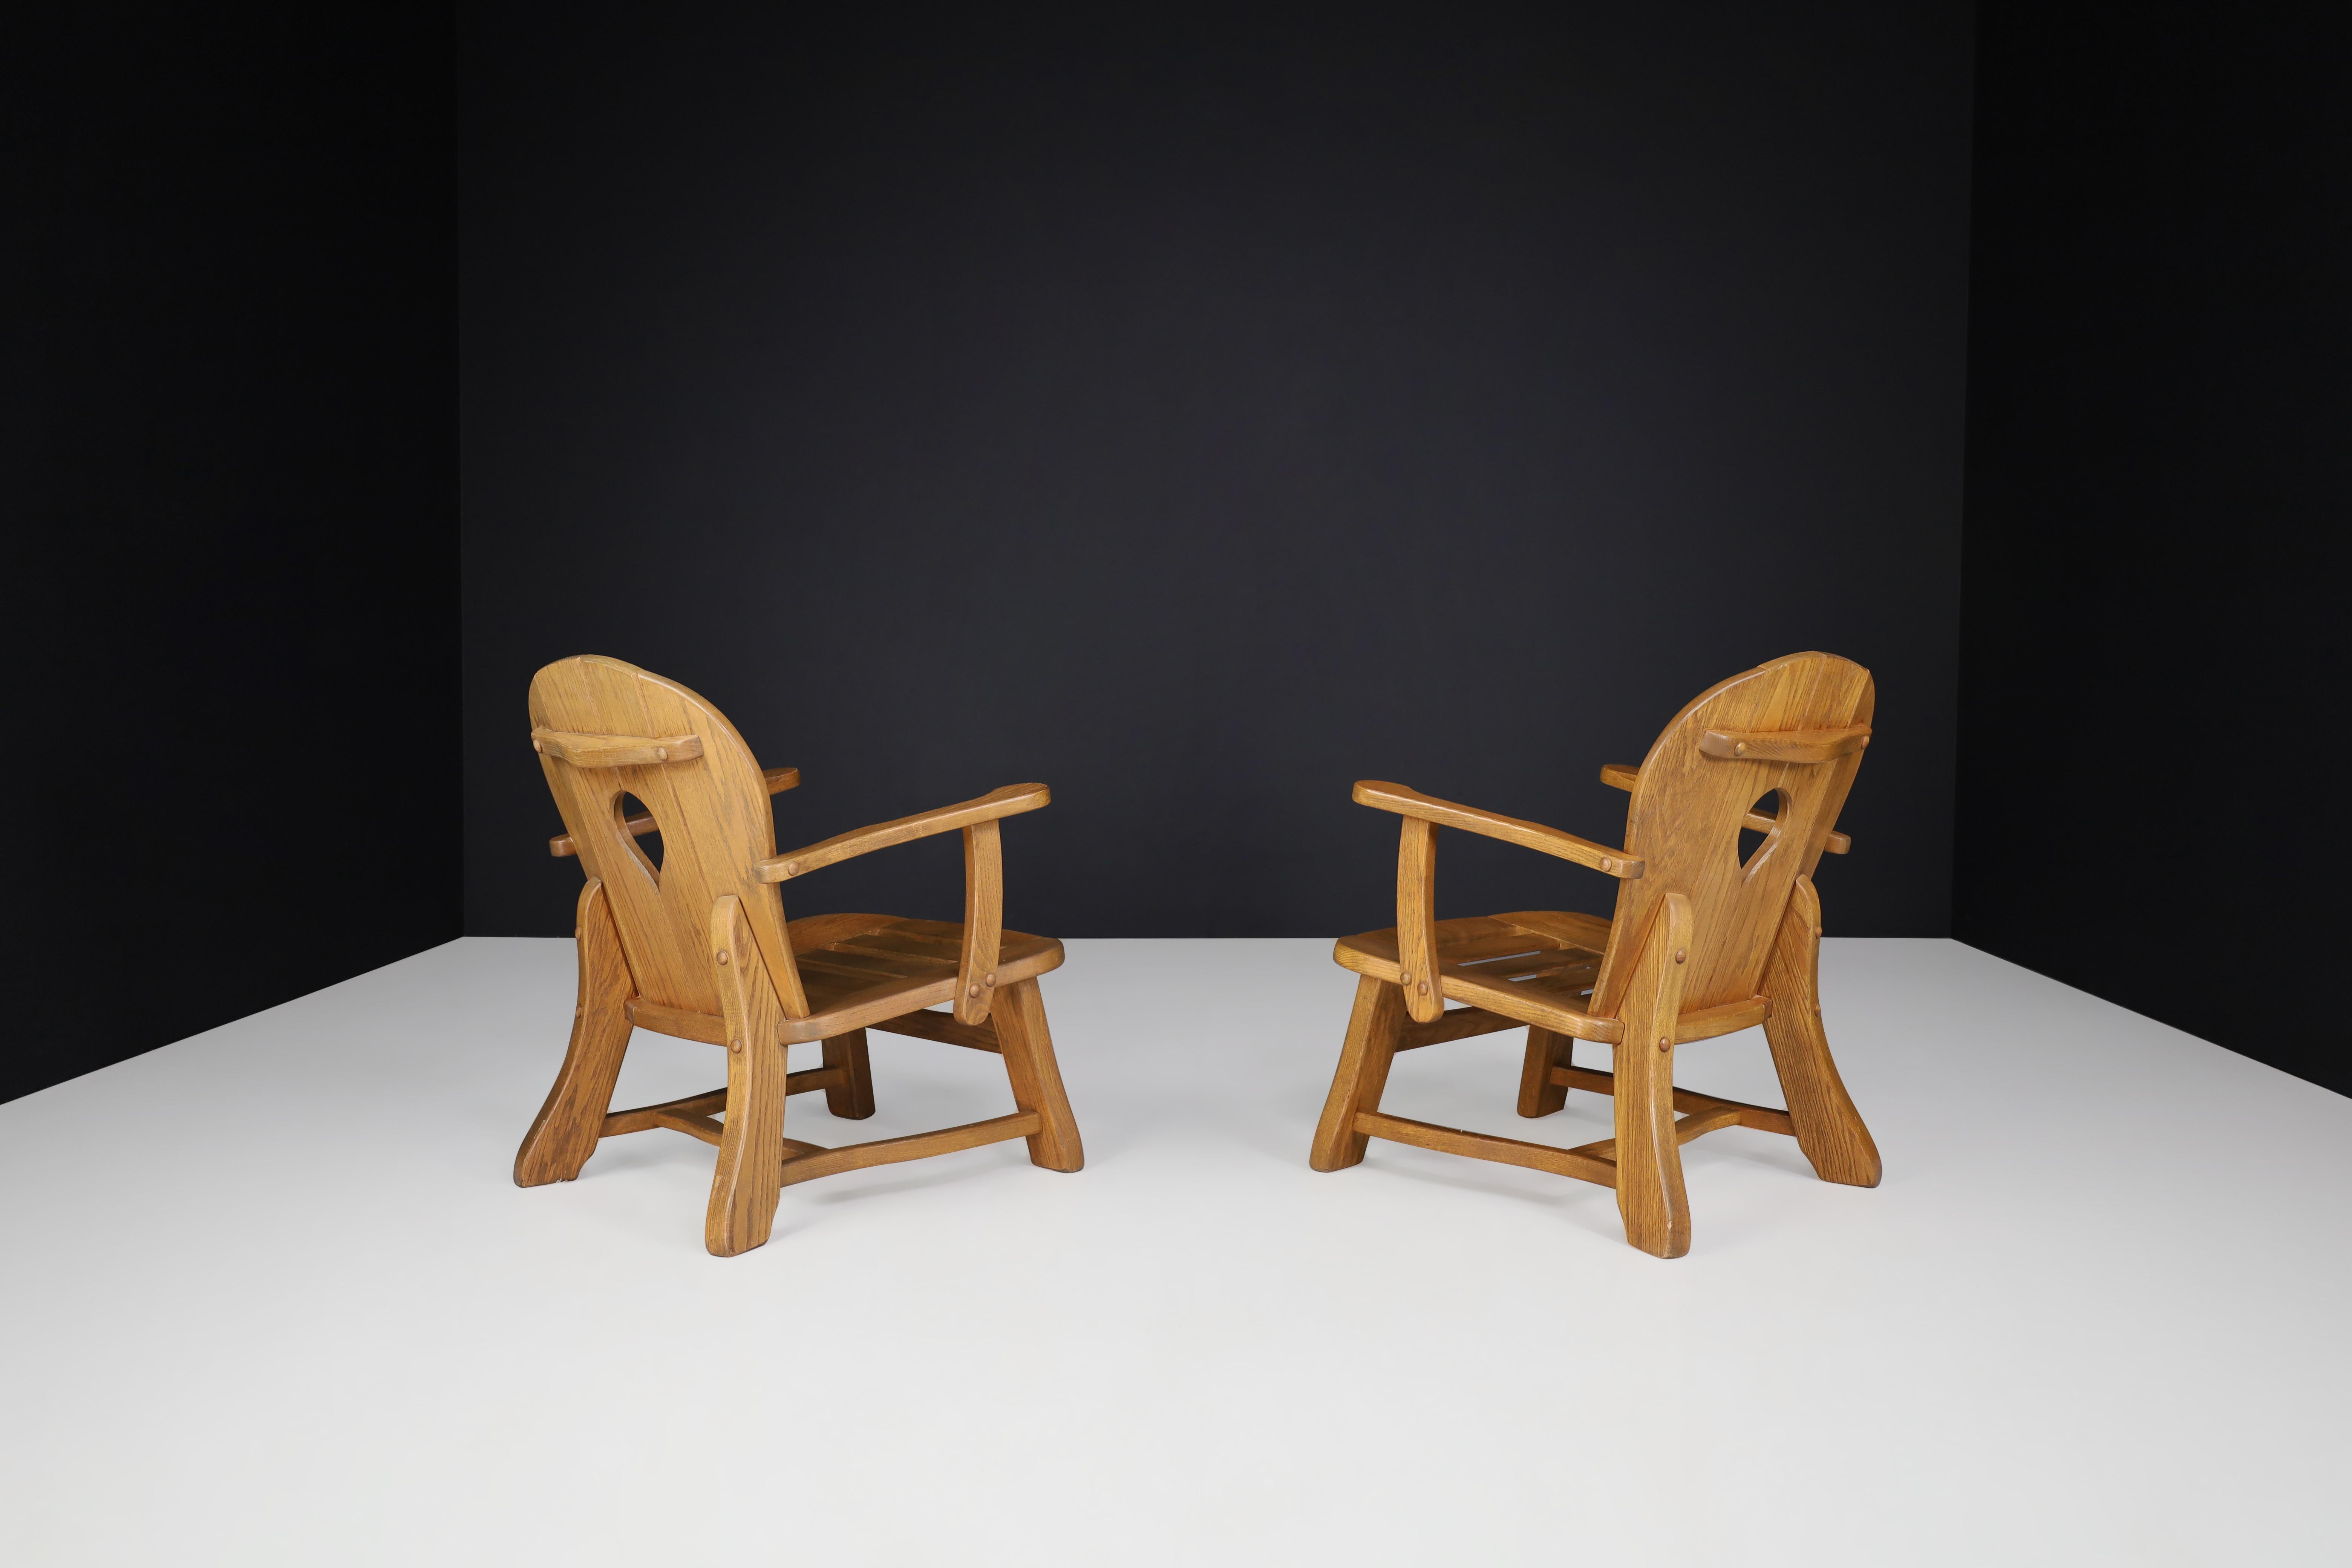 Sculptural Lounge Chairs in Oak, France, 1960s For Sale 3